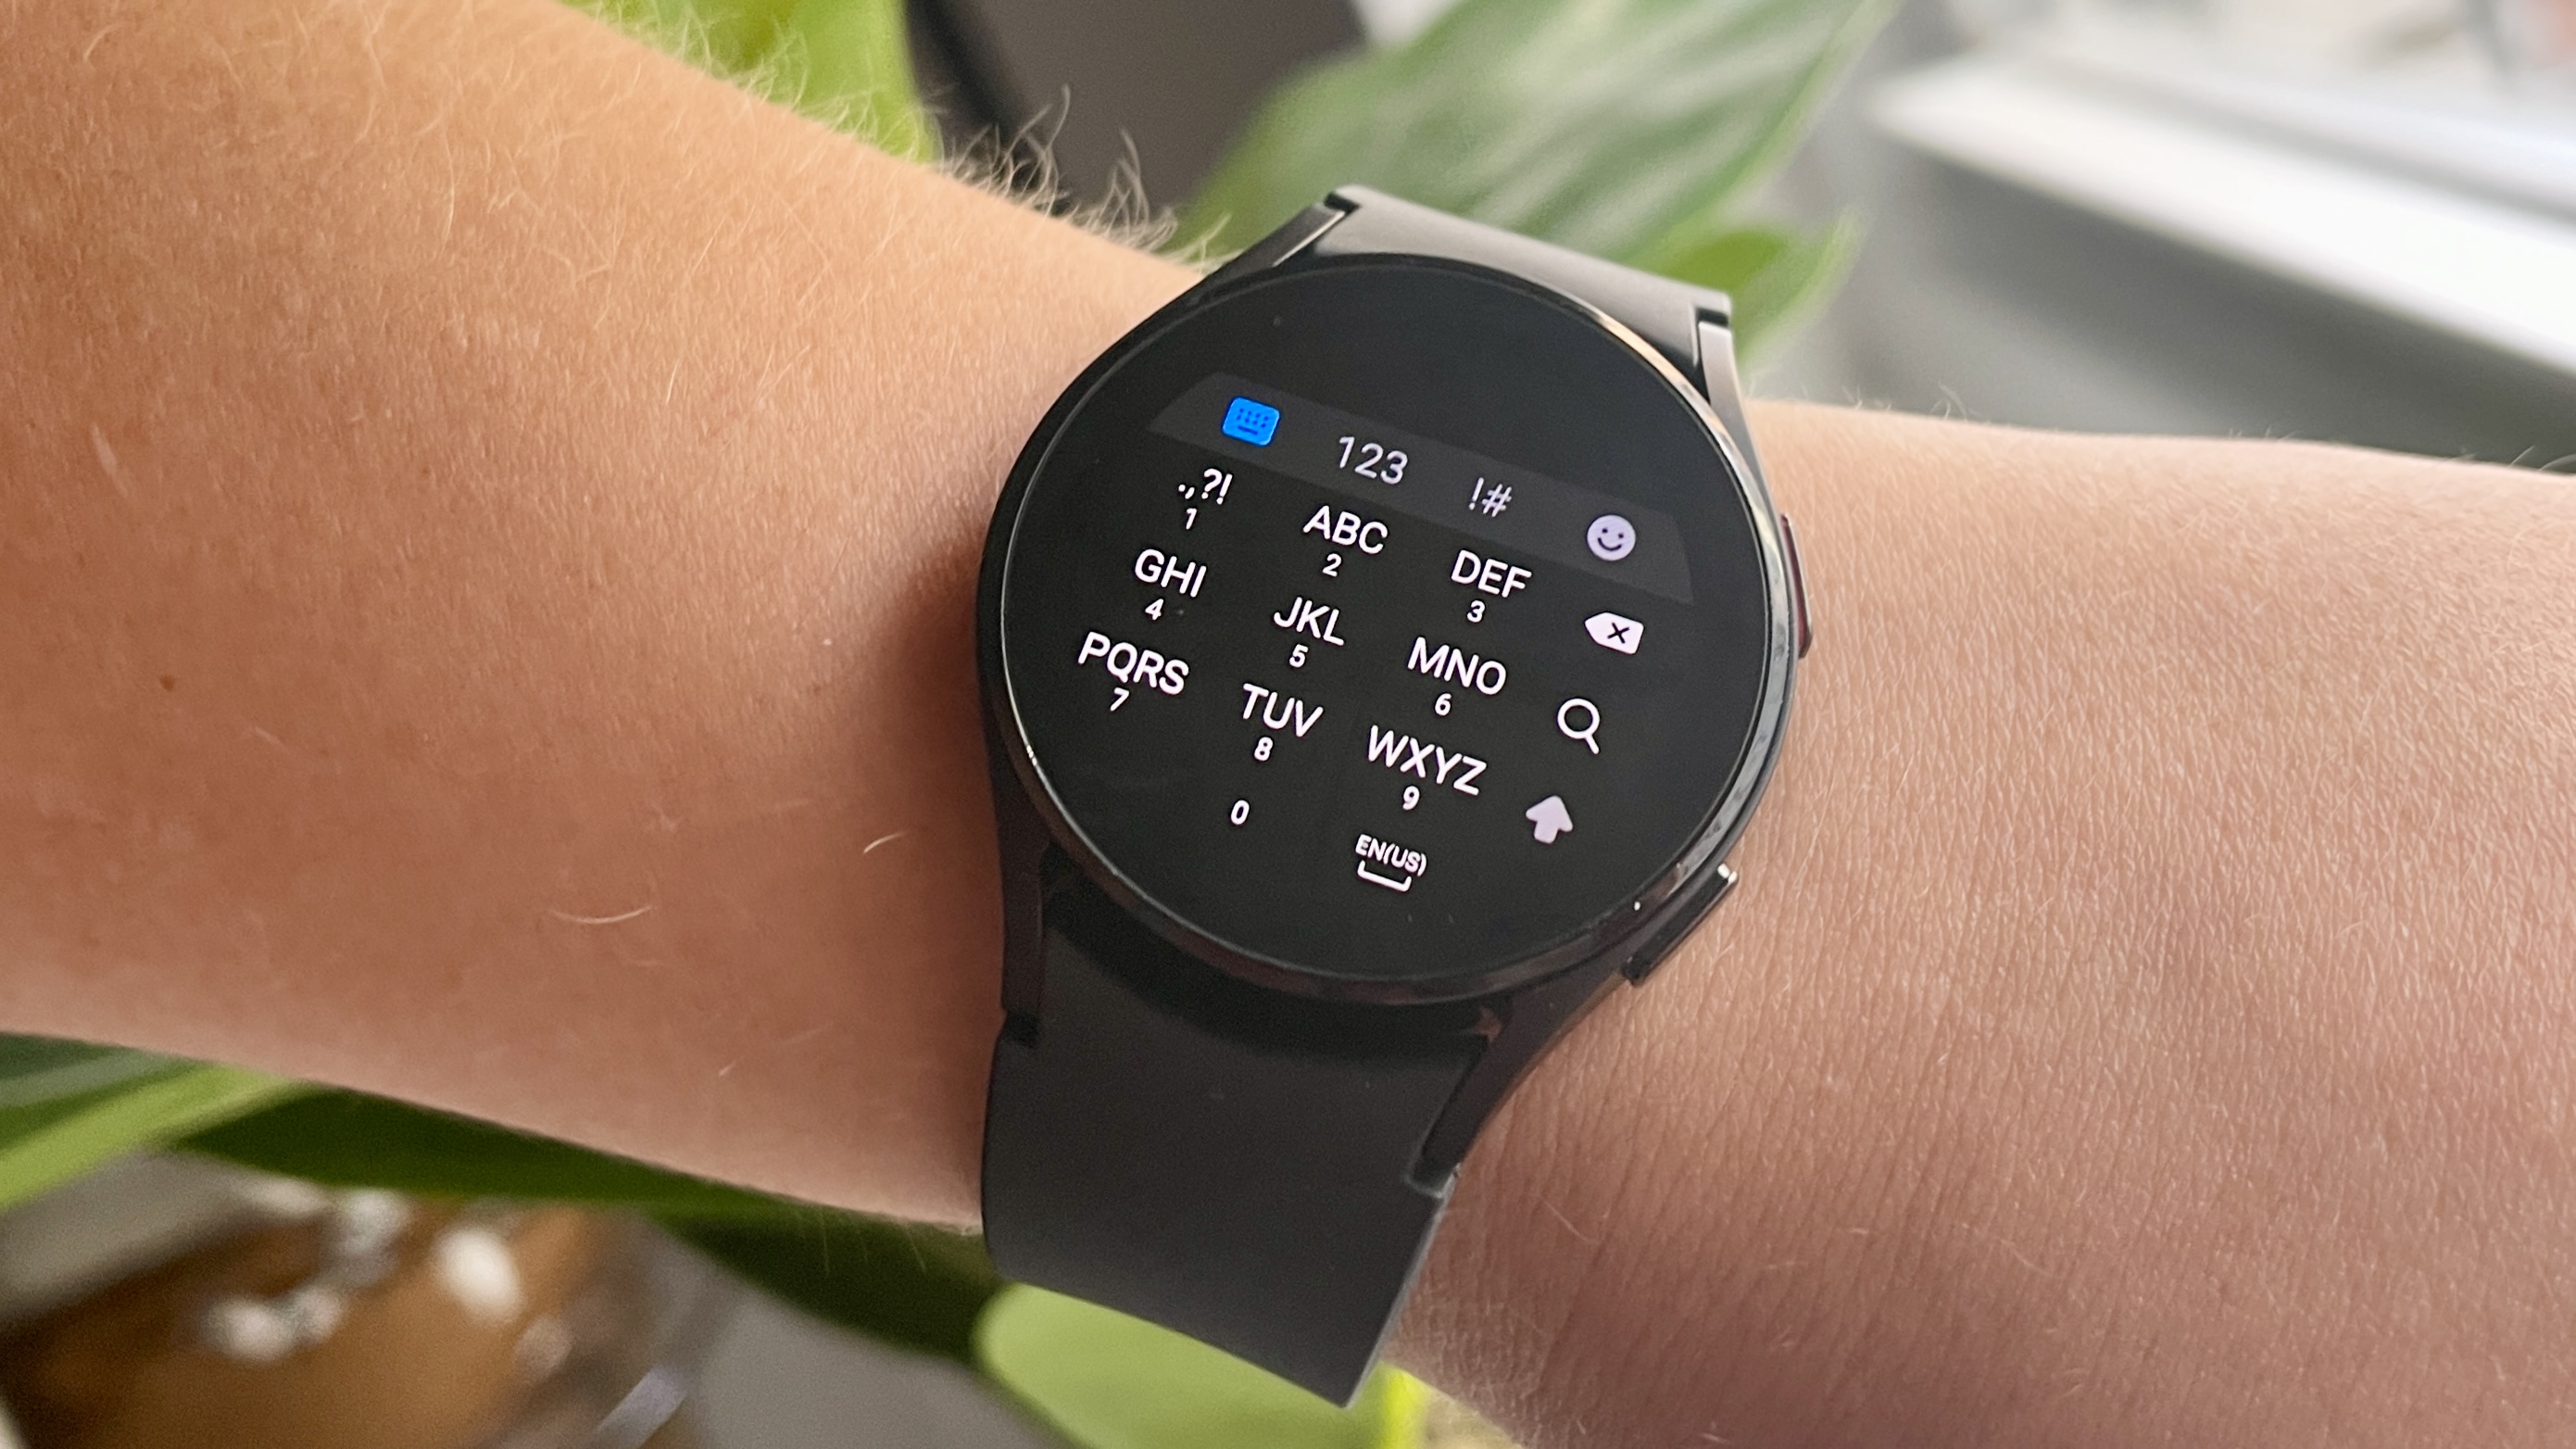 Samsung Galaxy Watch 4 Wear OS features - Messages and keyboard